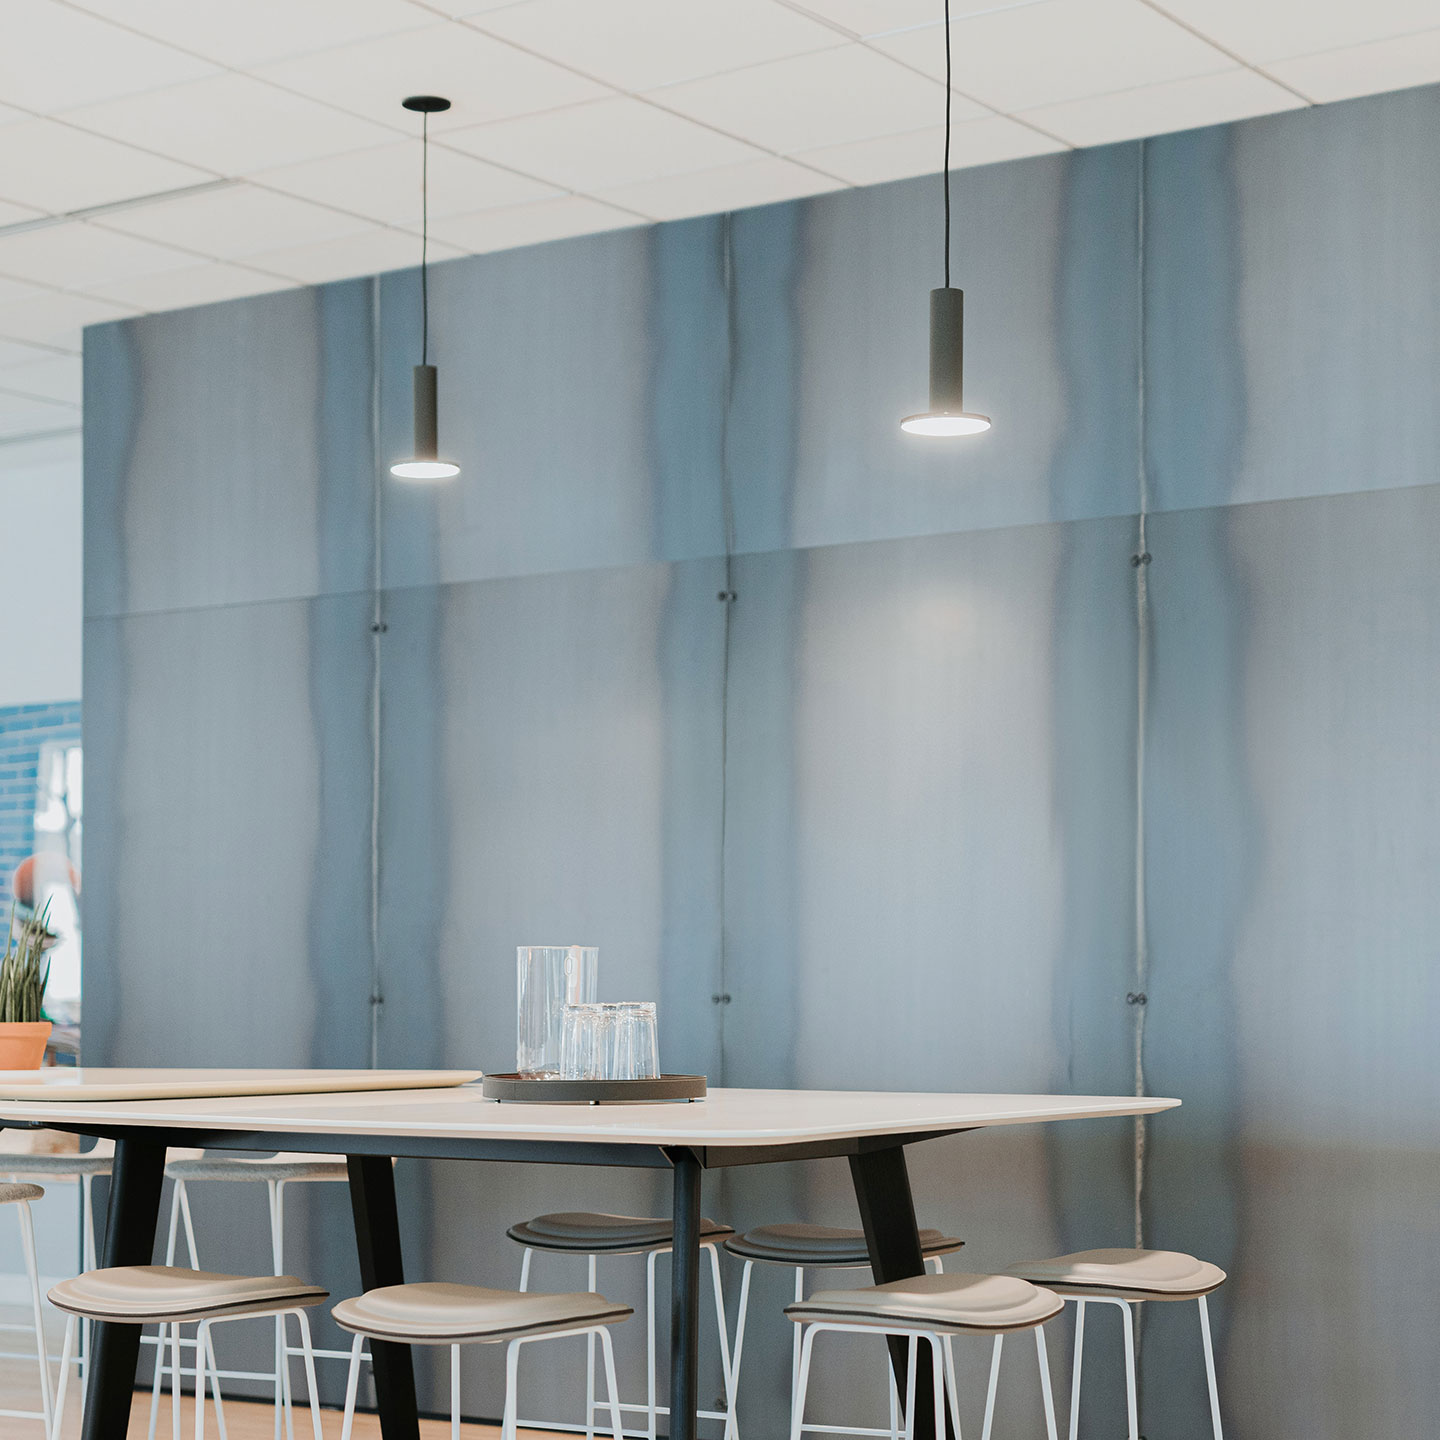 Haworth Cielo Lighting in grey hanging from wall with white table and white chairs in open office setting with blue wall dividing 